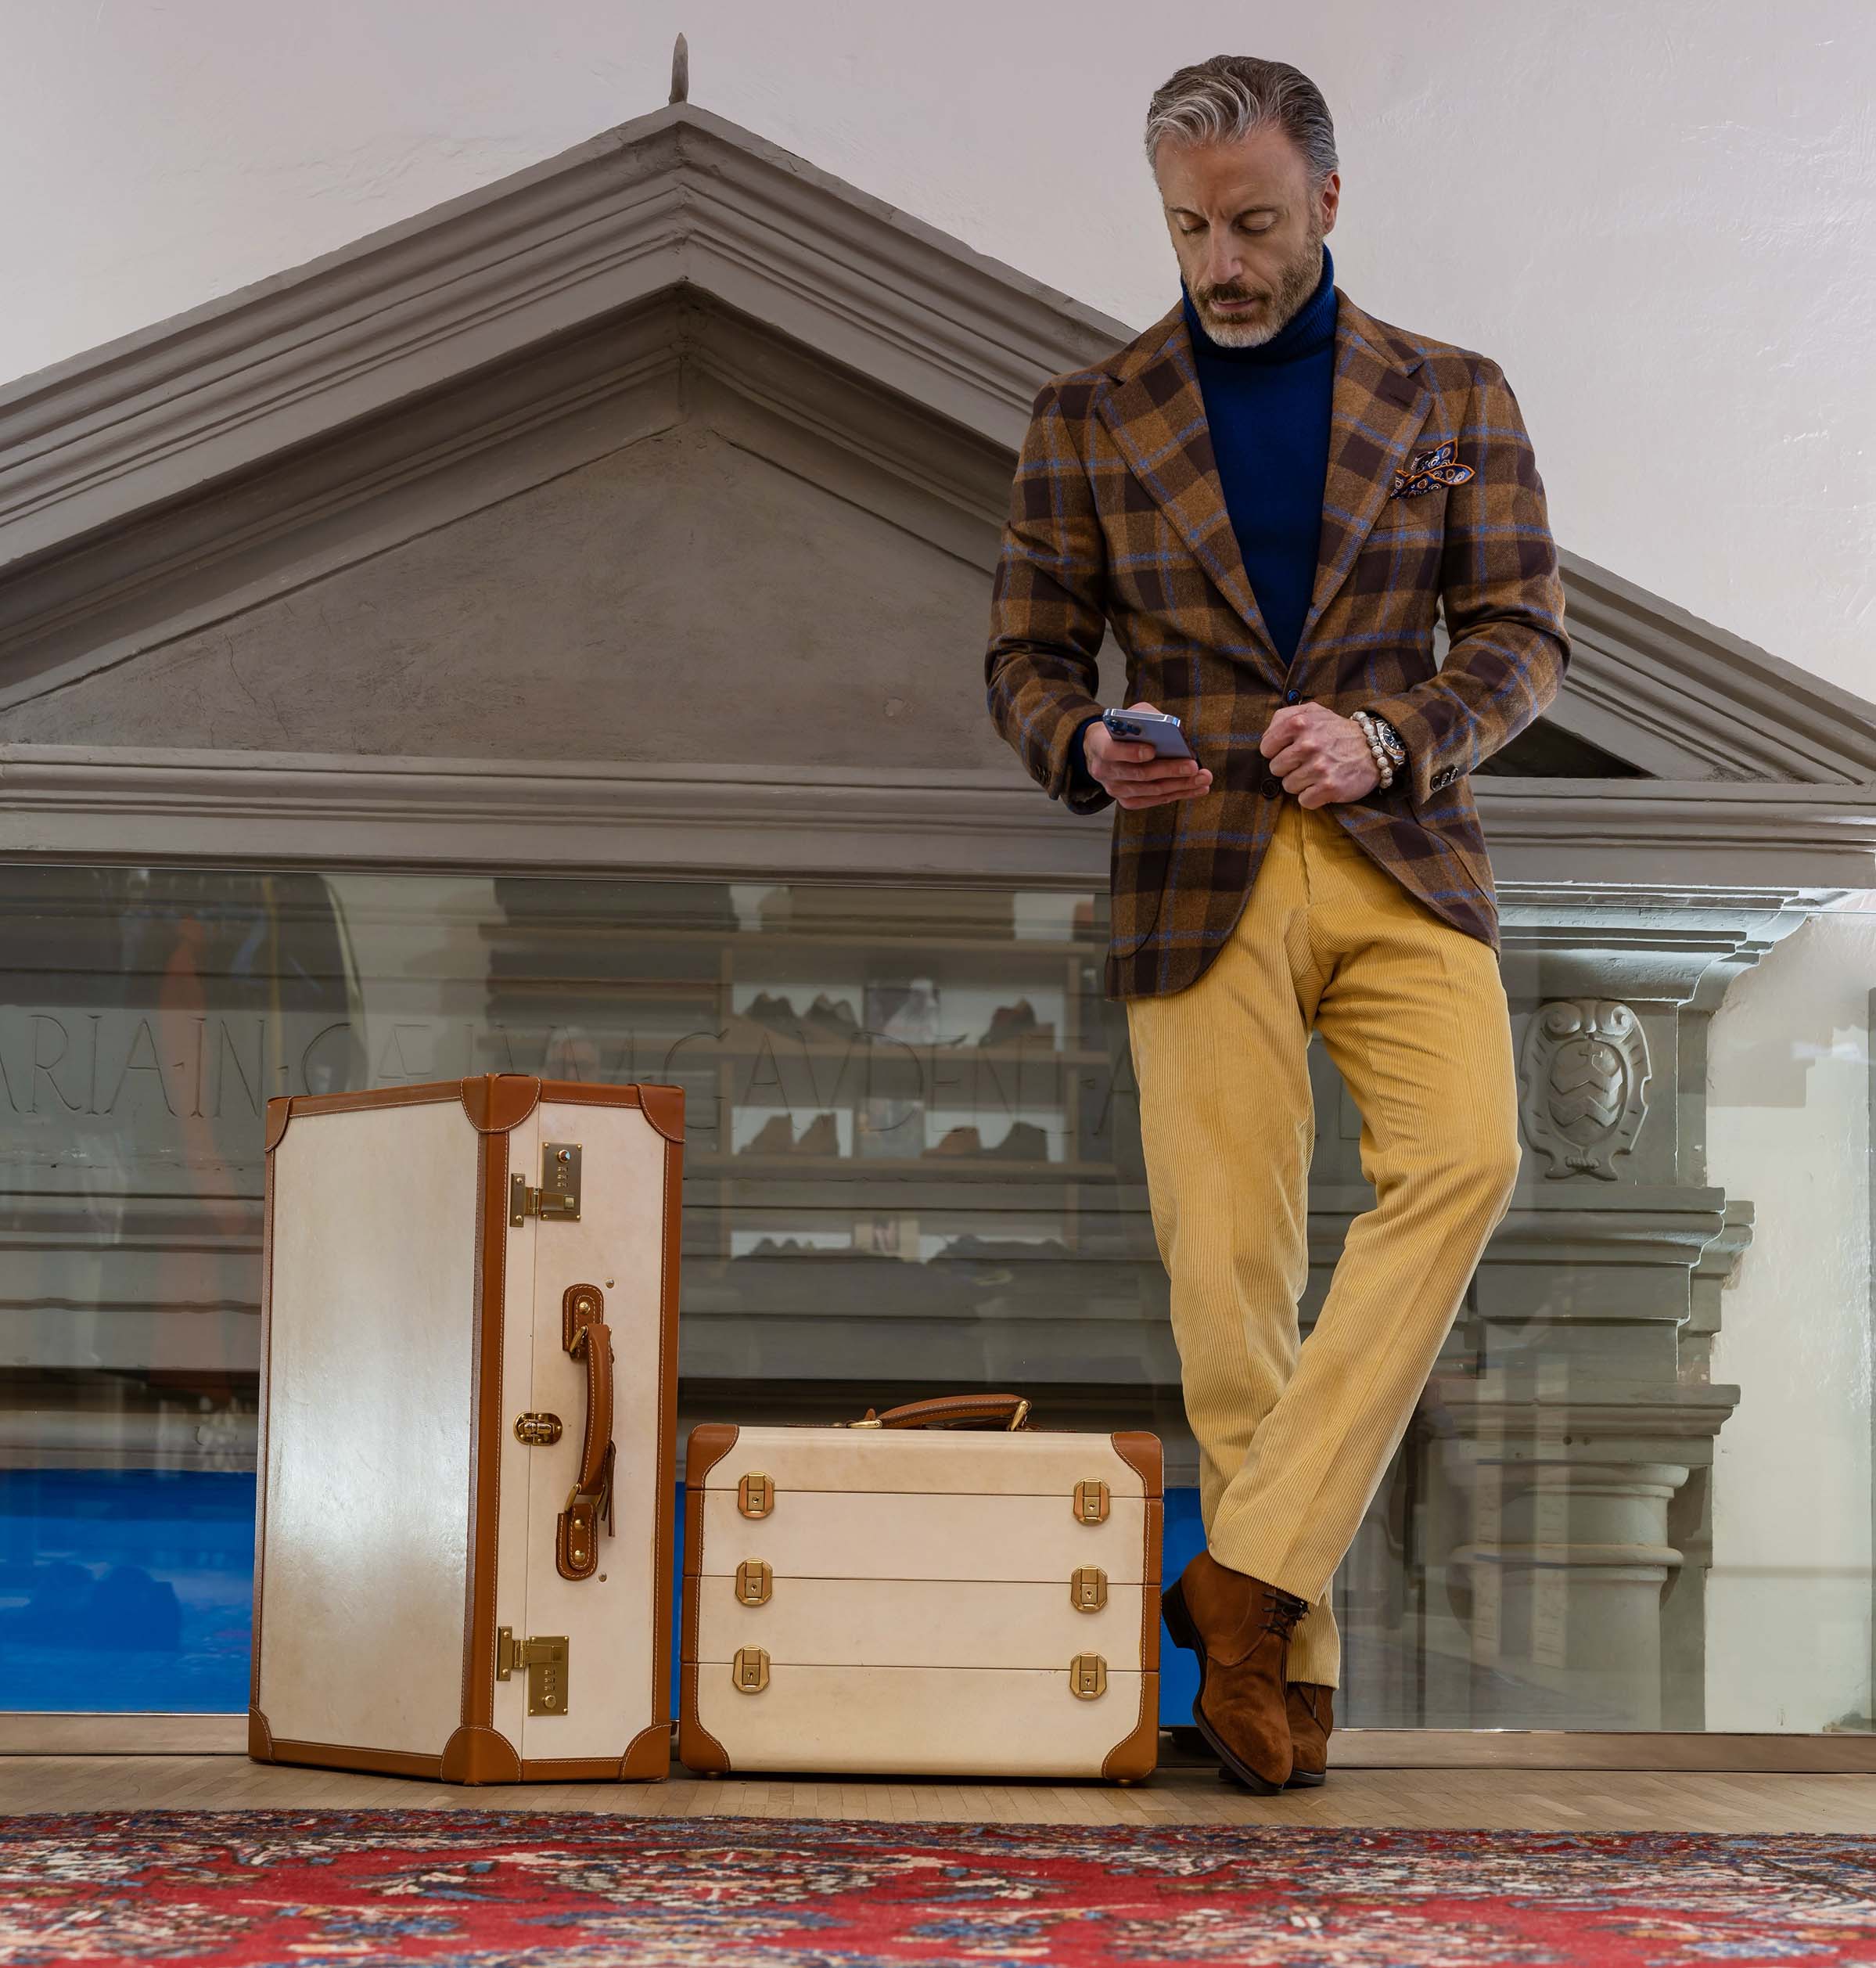 Worn in the shot: Brown Suede Chukka Boots, Art. E7000V1, Yellow Cotton Velvet Trousers, Art,SV3039 and Brown Plaid Wool Unstructured Jacket, Art. SV2083